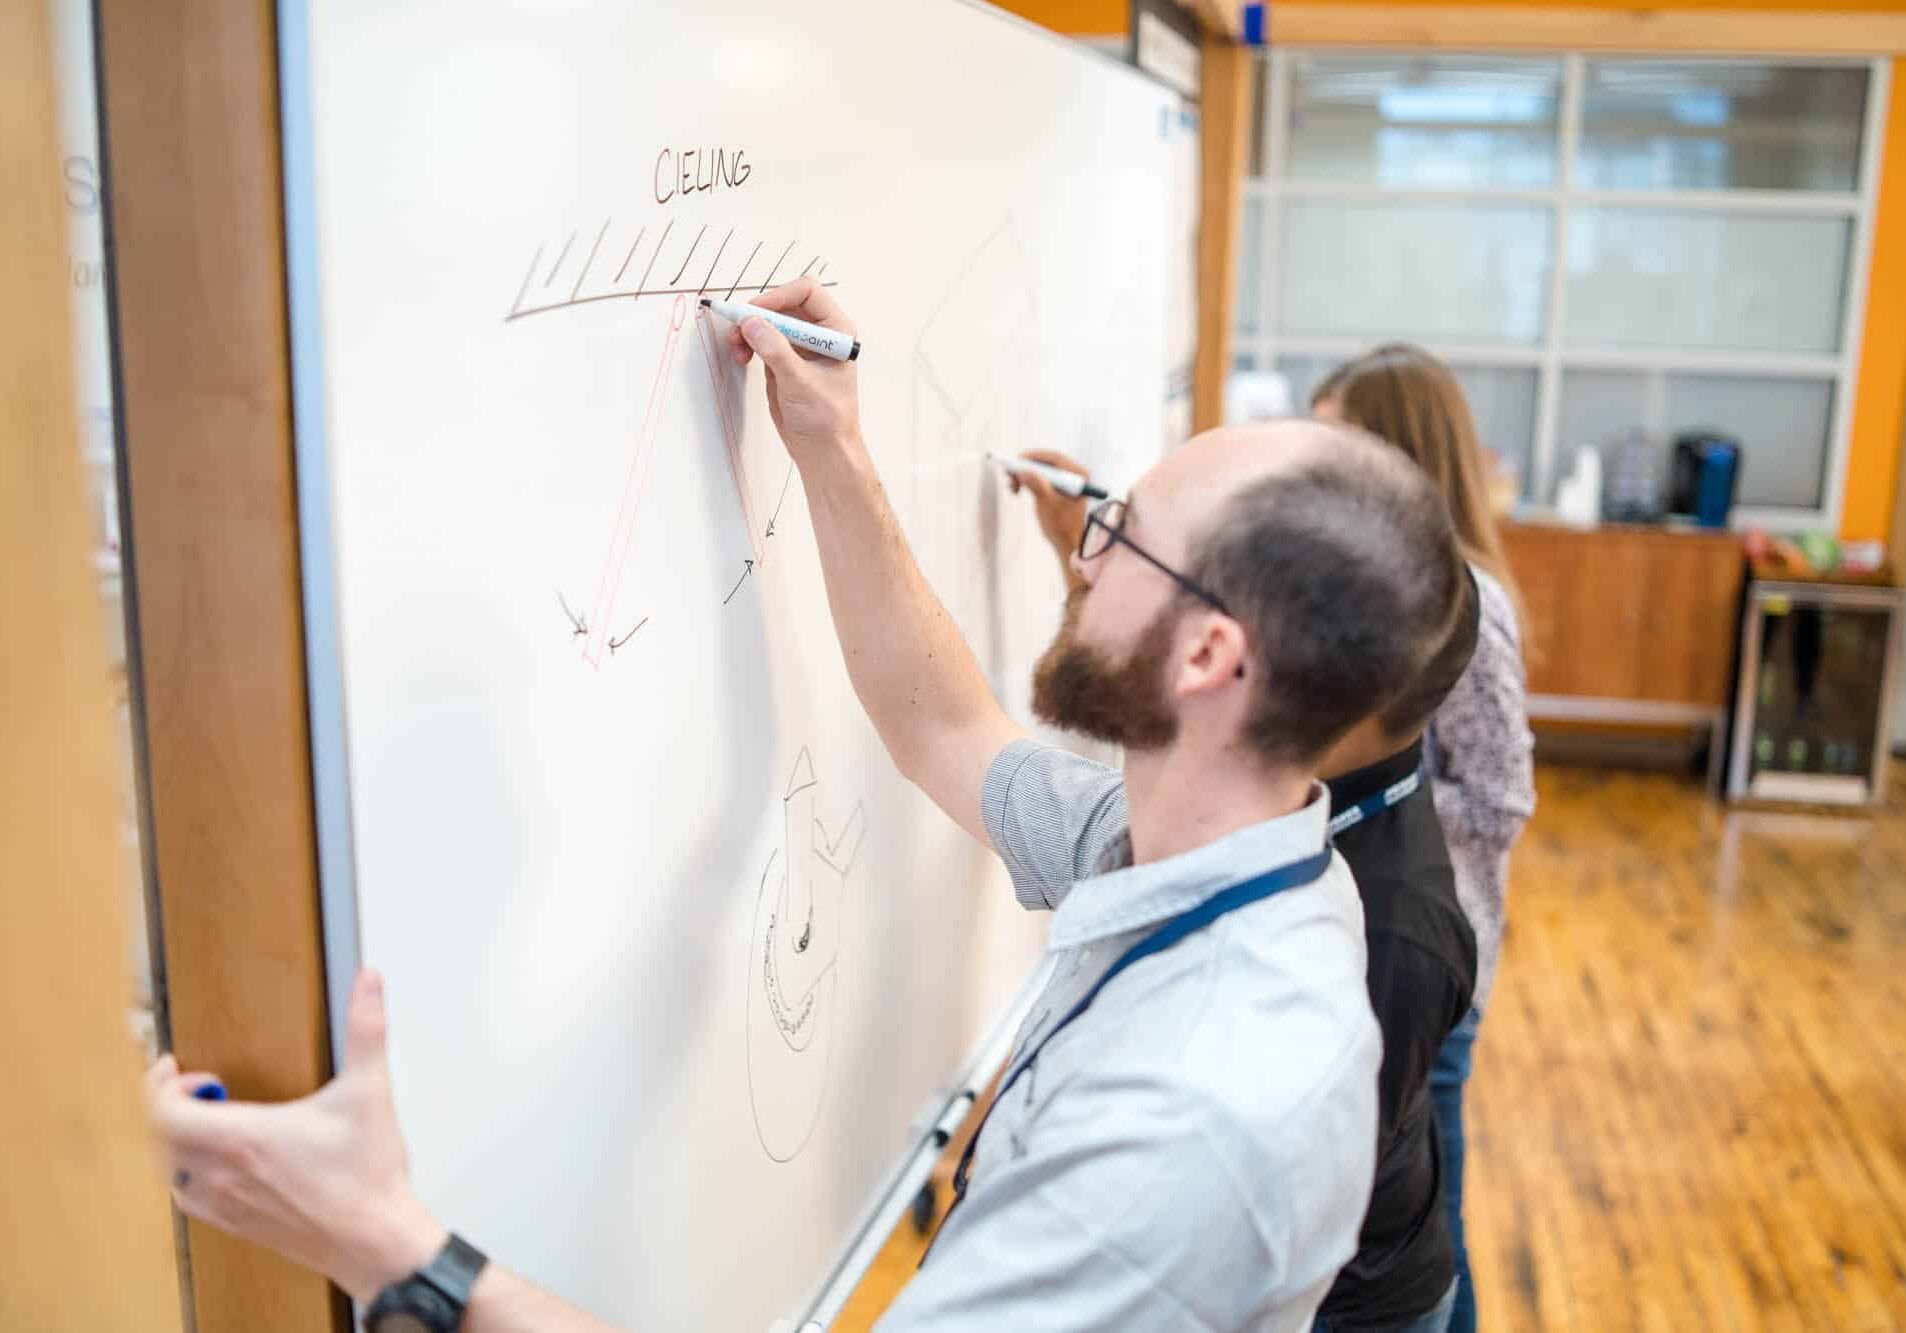 An engineer sketches out ideas on a whiteboard